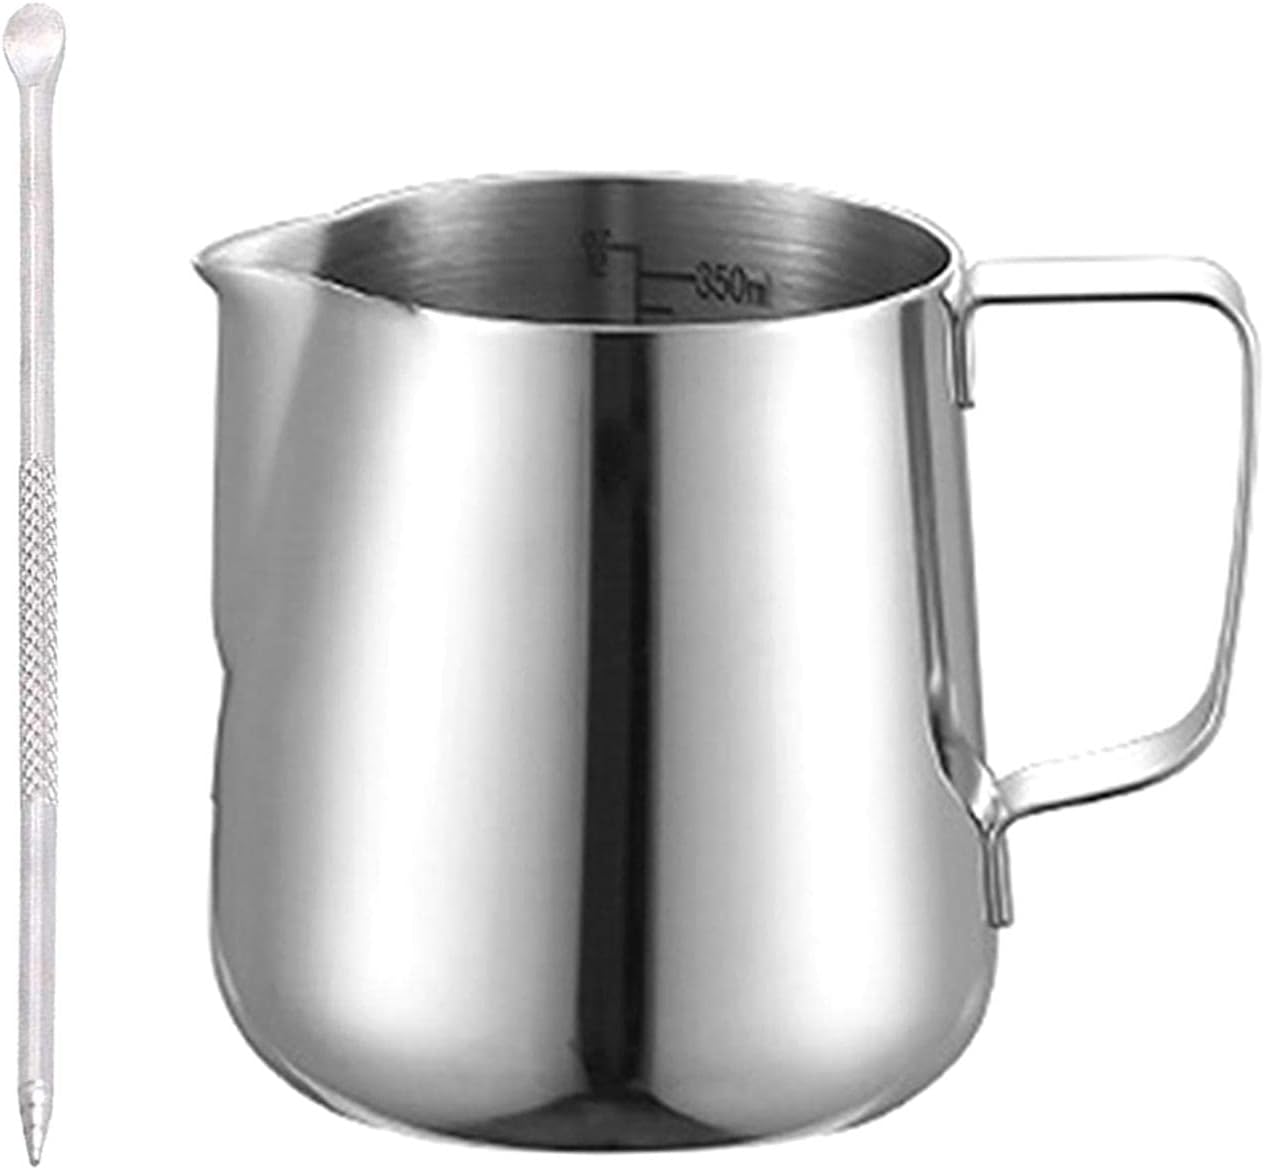 Milk Jug 350 ml Stainless Steel Frothing Jug 304 Stainless Steel Milk Frother with Latte Art Pen for Espresso, Milk Frother, Coffee, Latte Art, Coffee Lovers (Size: 350 ml)